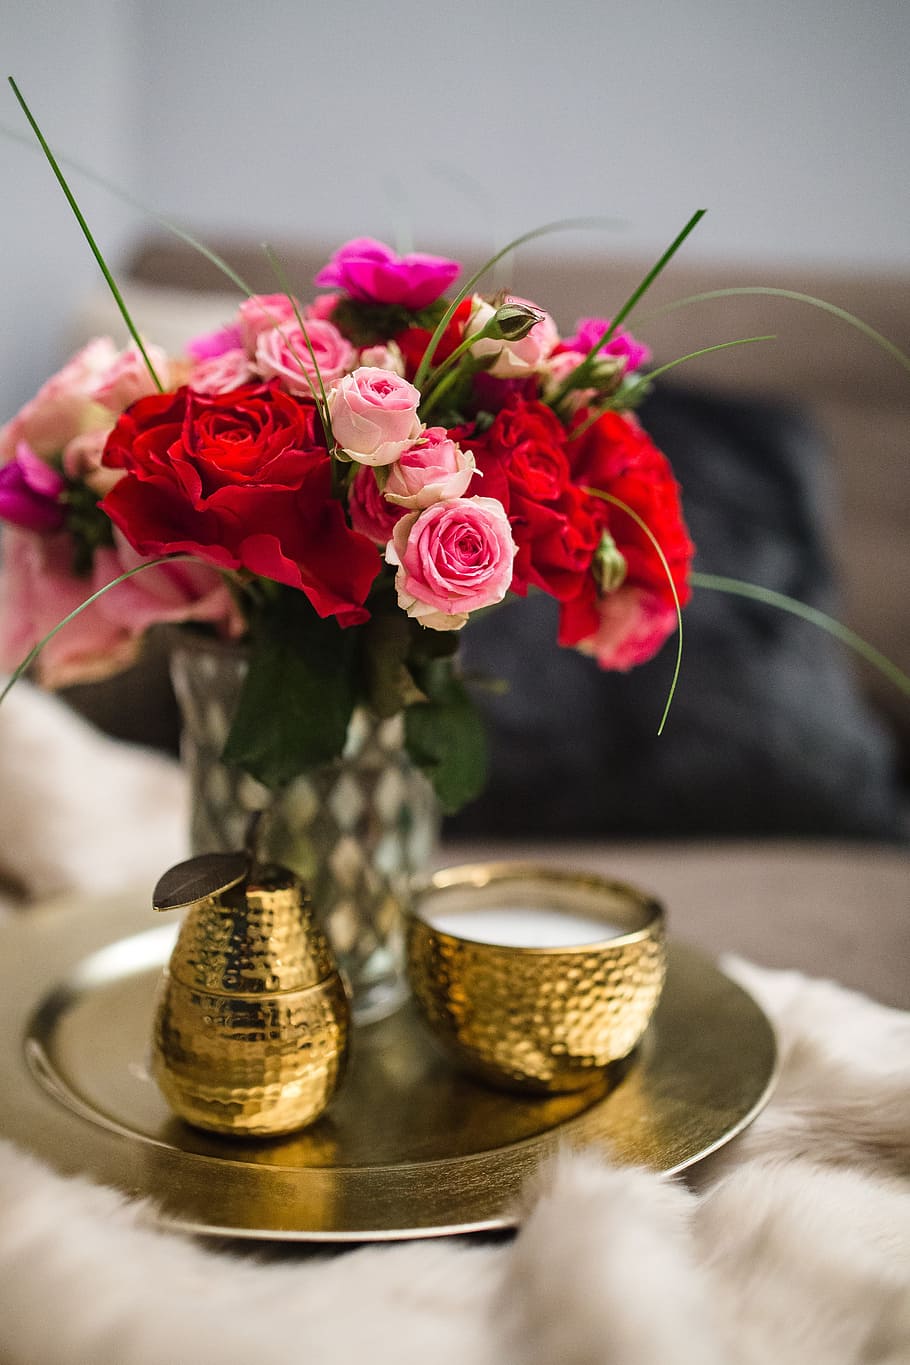 bouquet, flowers, candles, roses, lovely, gold, golden, romantic, decorations, pink